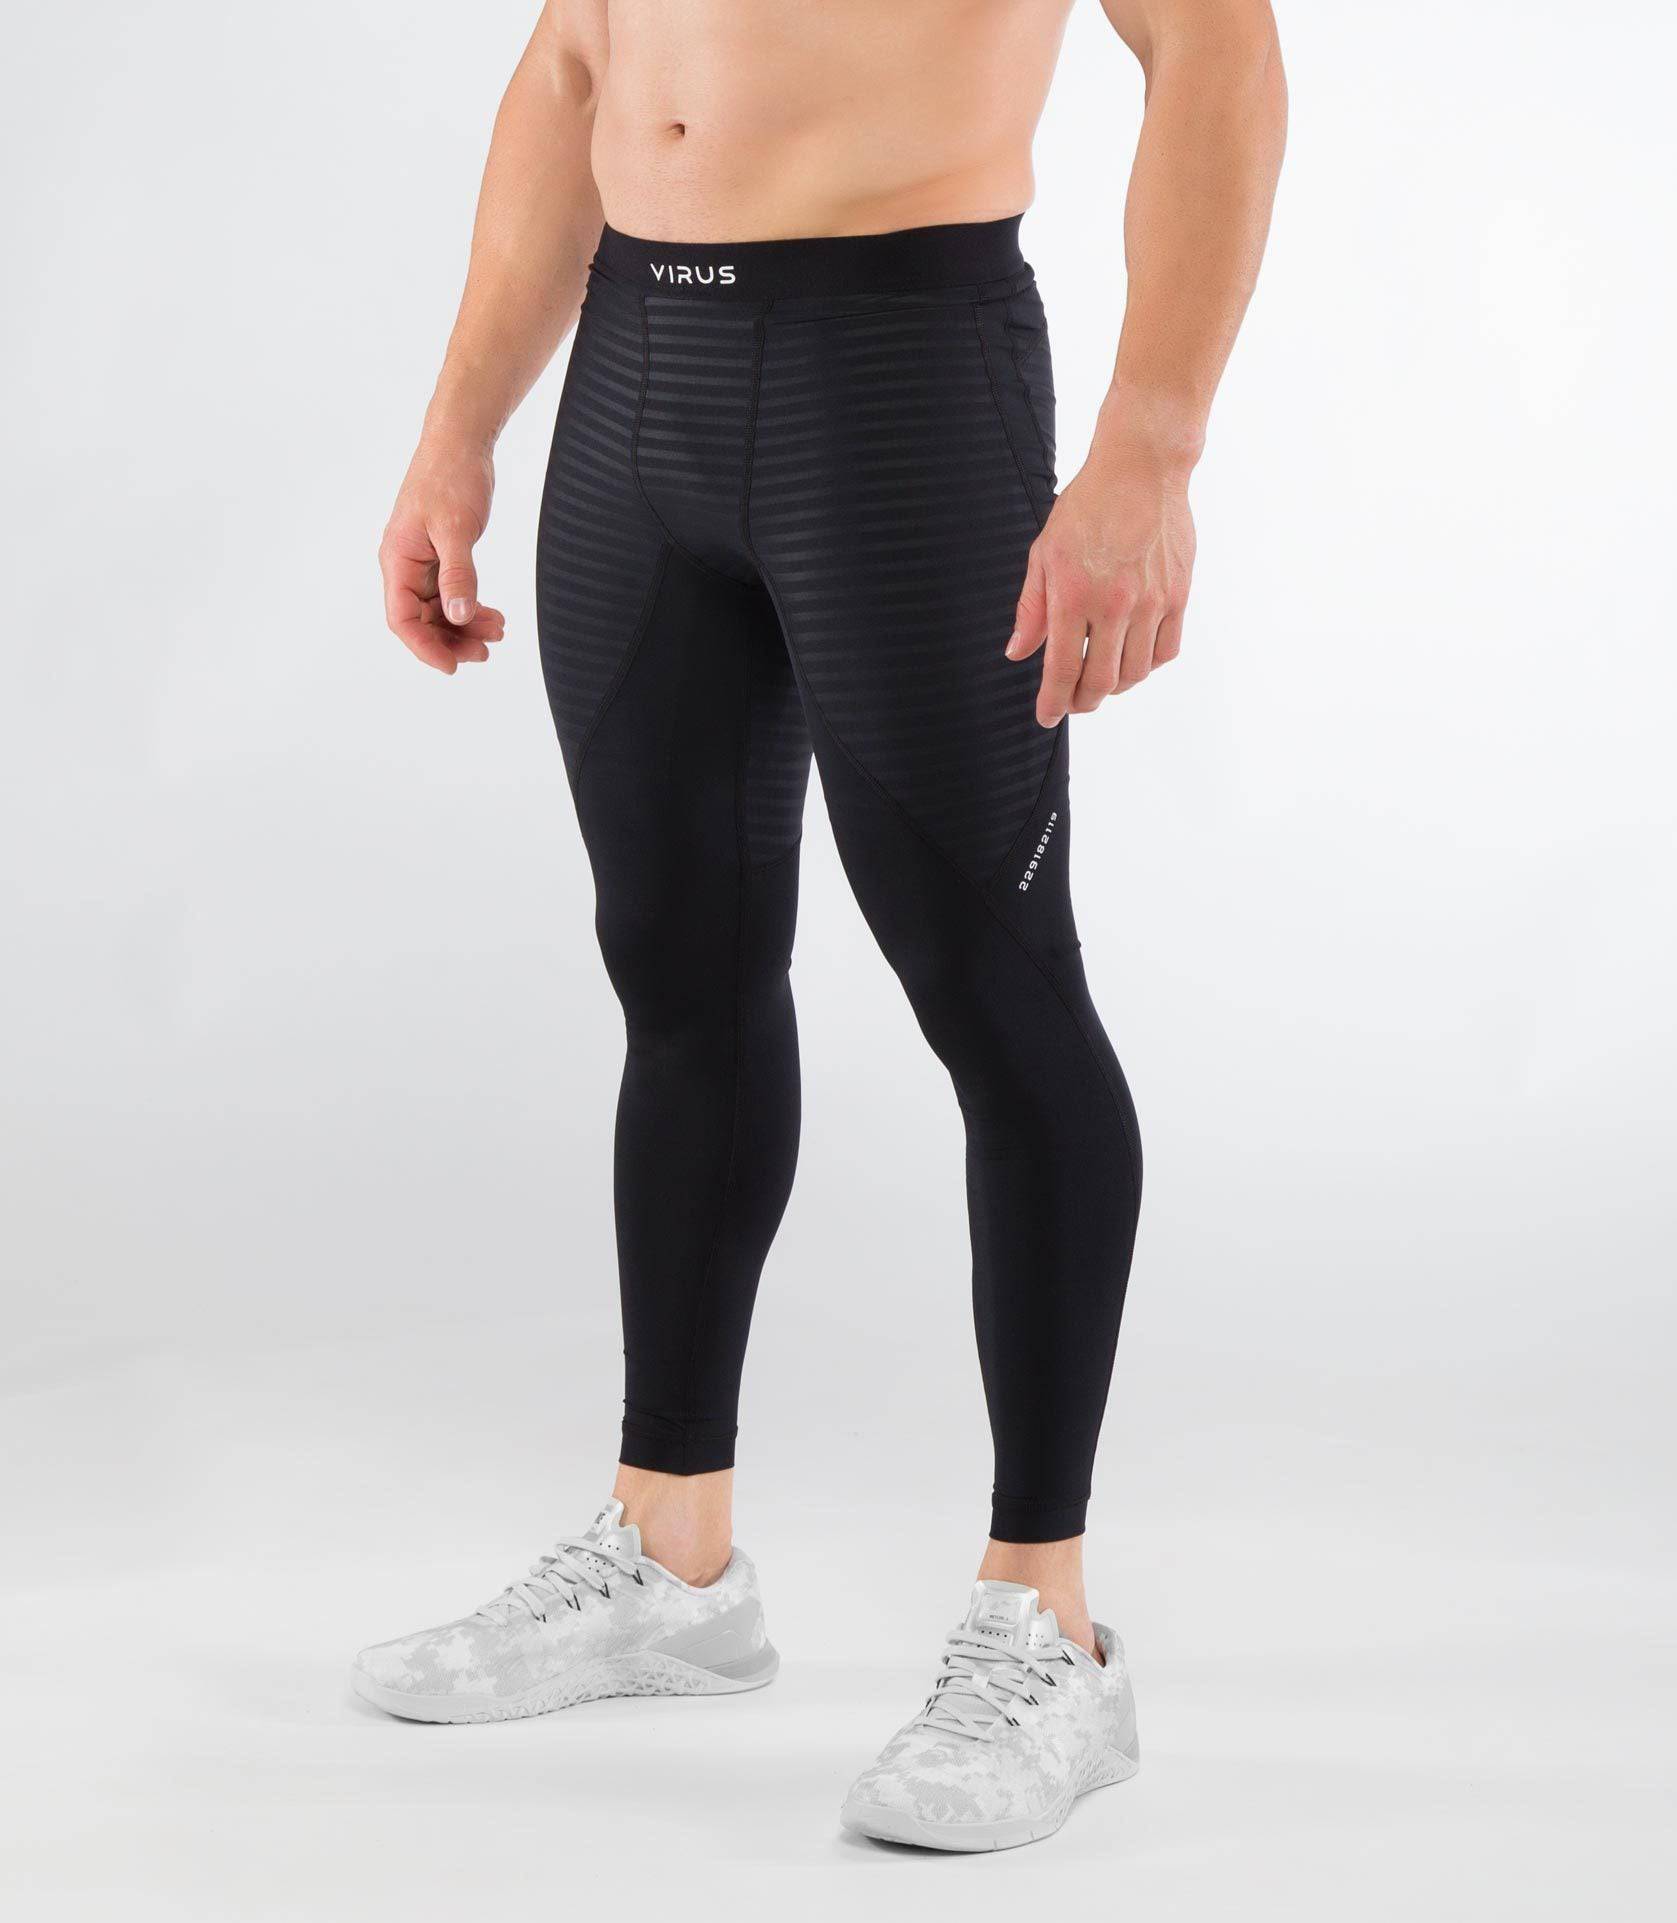 Virus, CO38 Align Stay Cool Compression Pants